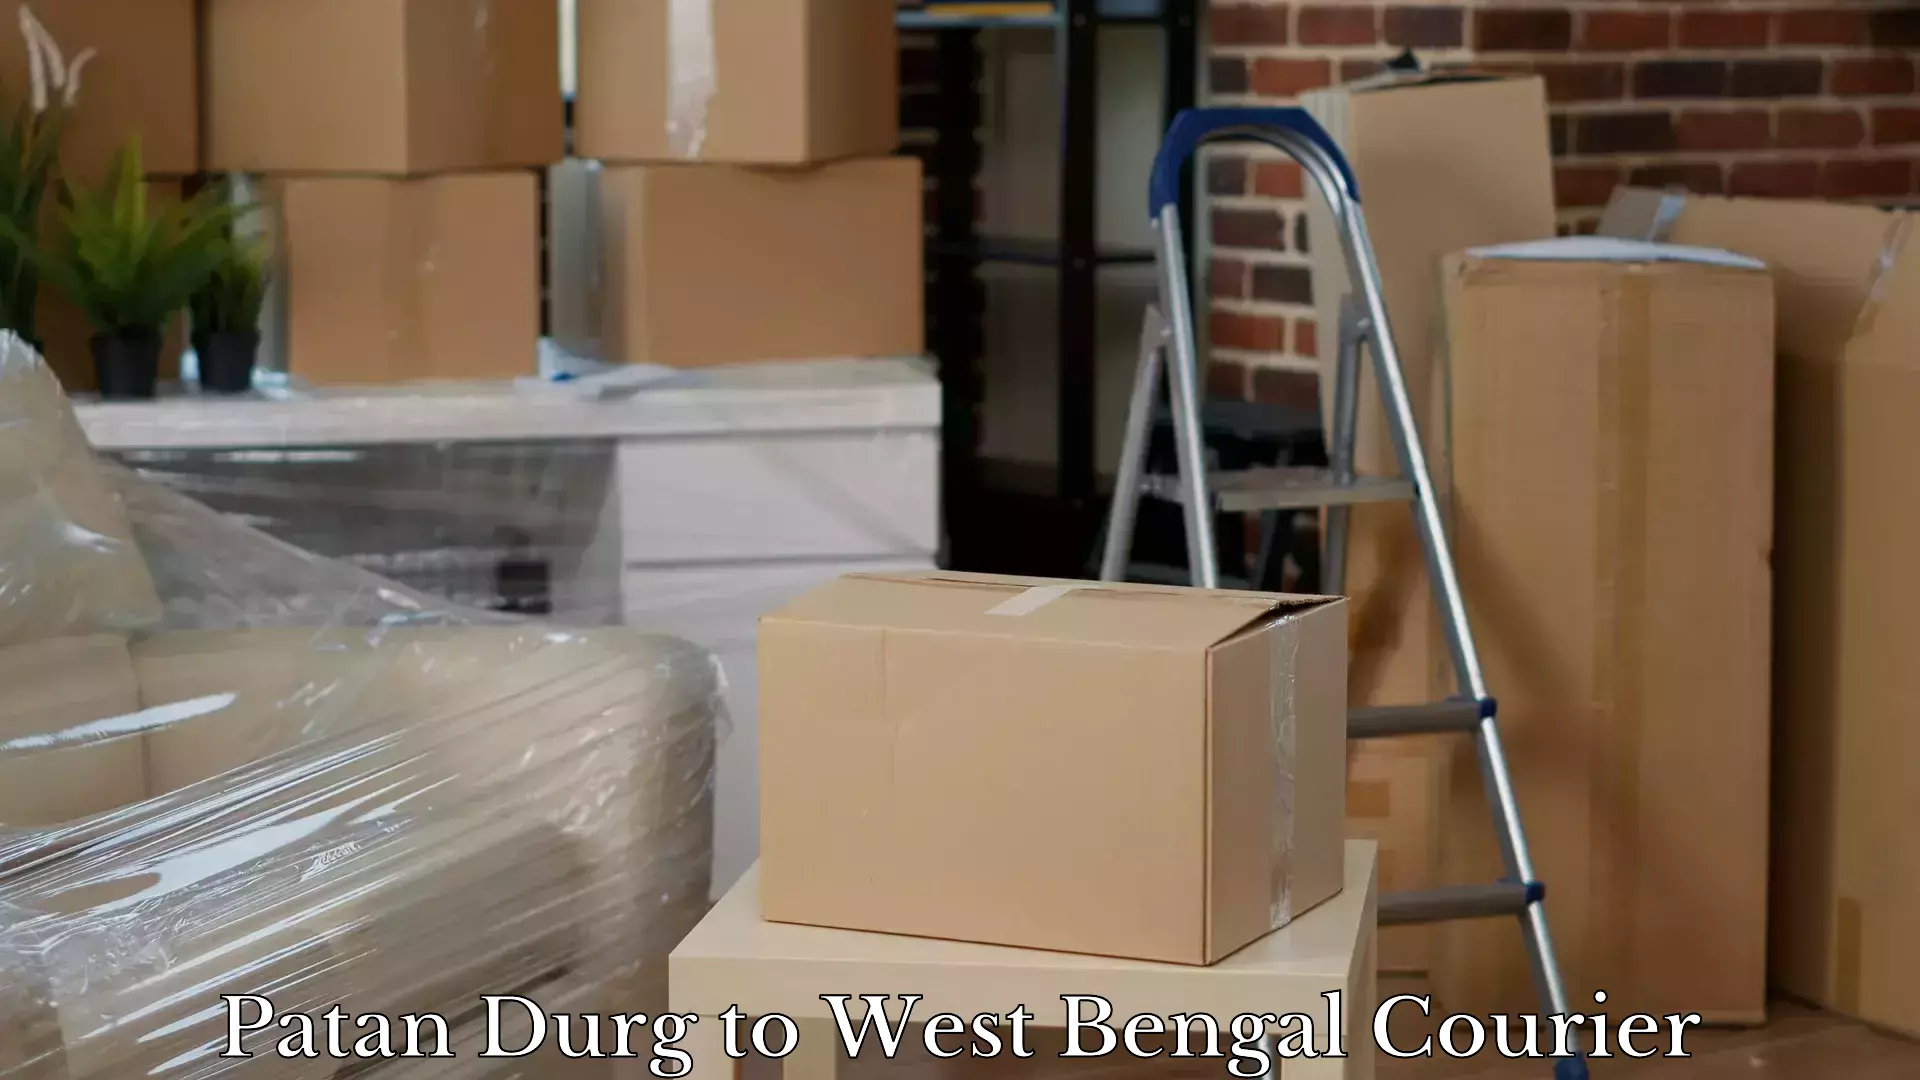 Luggage transport solutions Patan Durg to West Bengal